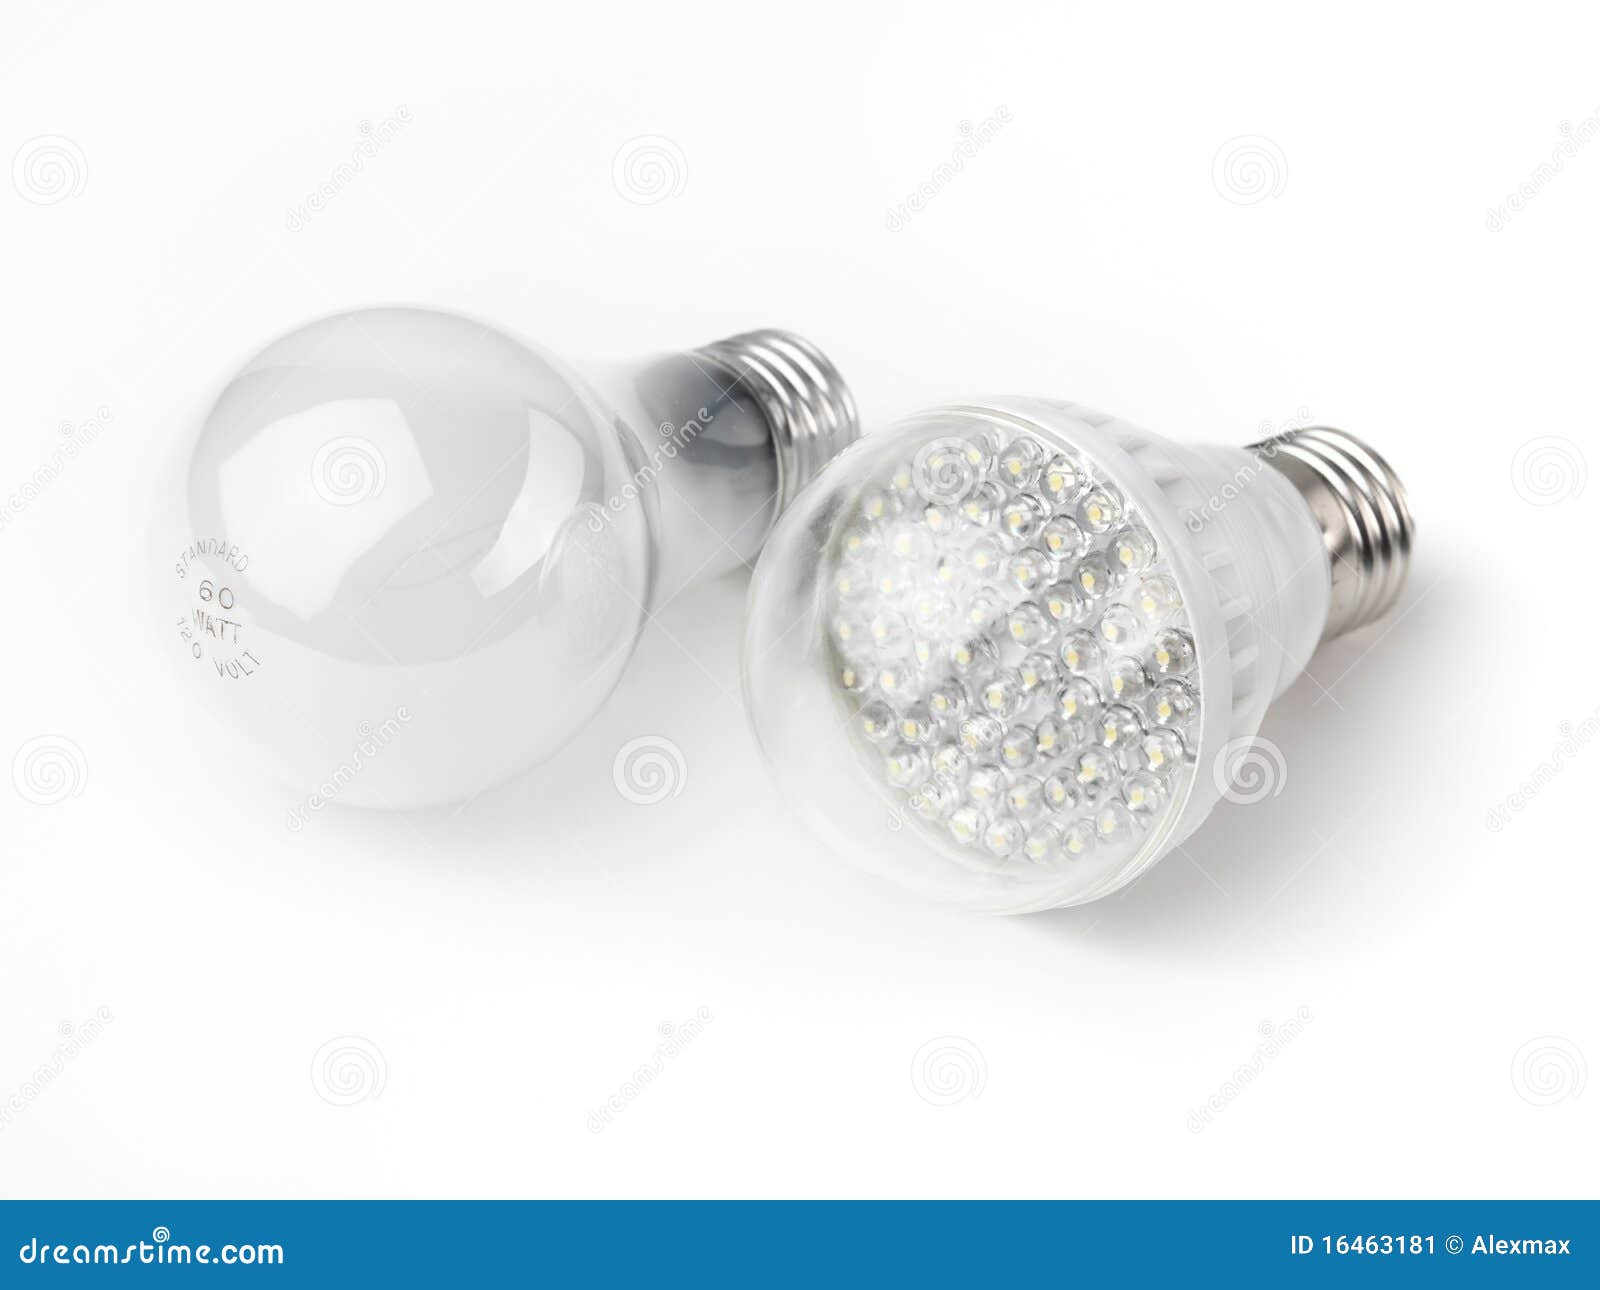 led and incandescent light bulbs